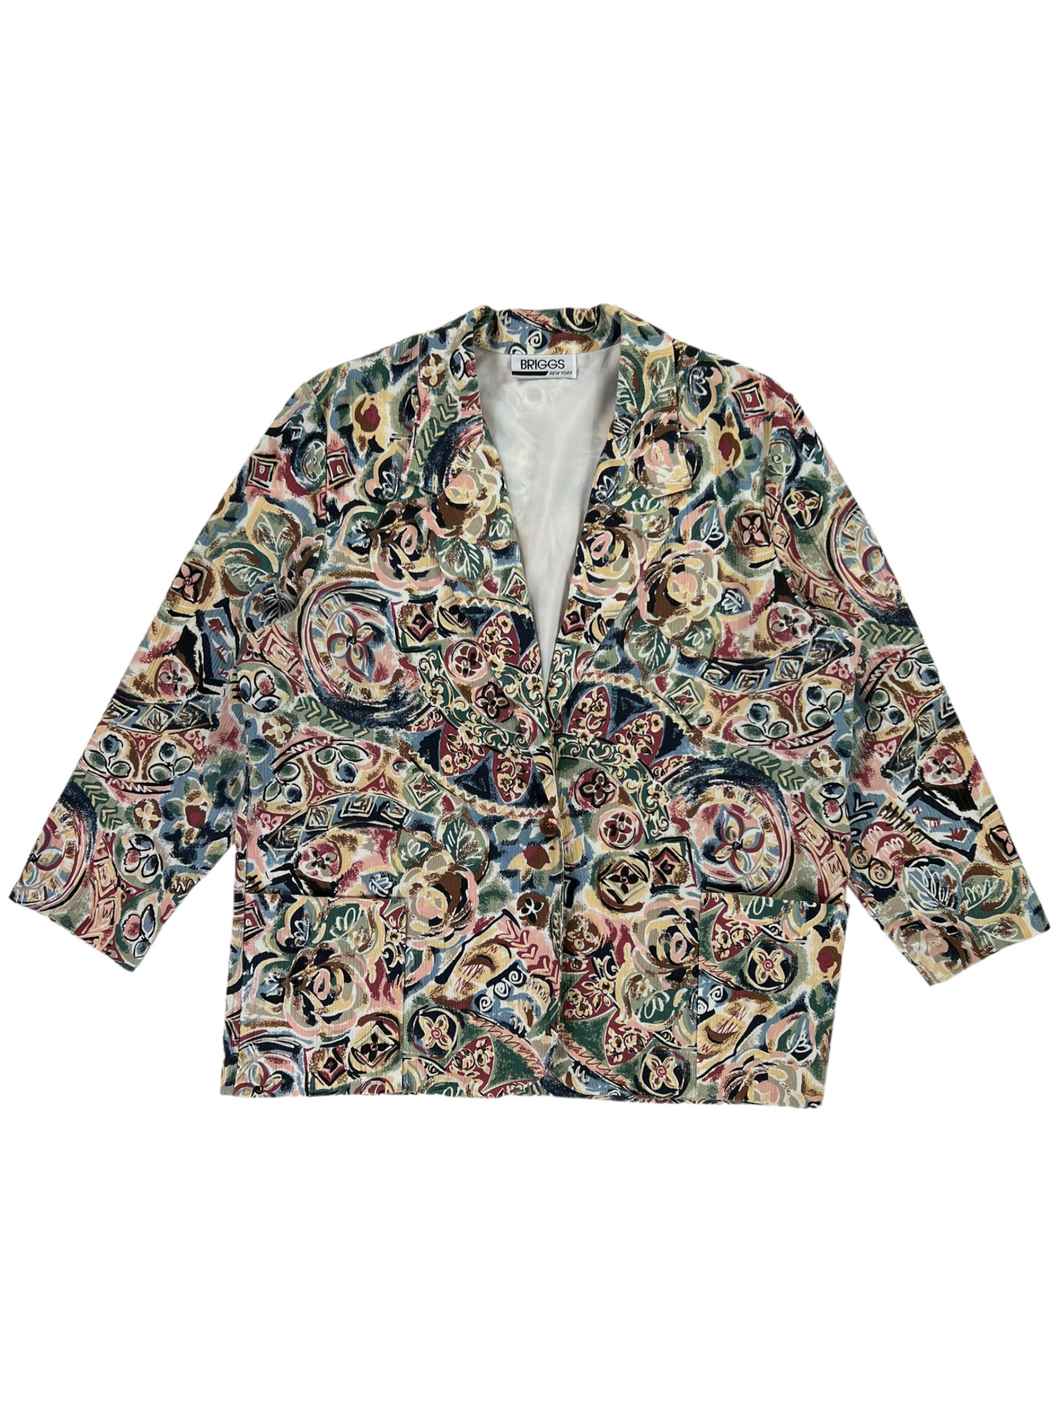 Vintage 90s Briggs New York all over print floral AOP women’s layering shirt jacket (18W)